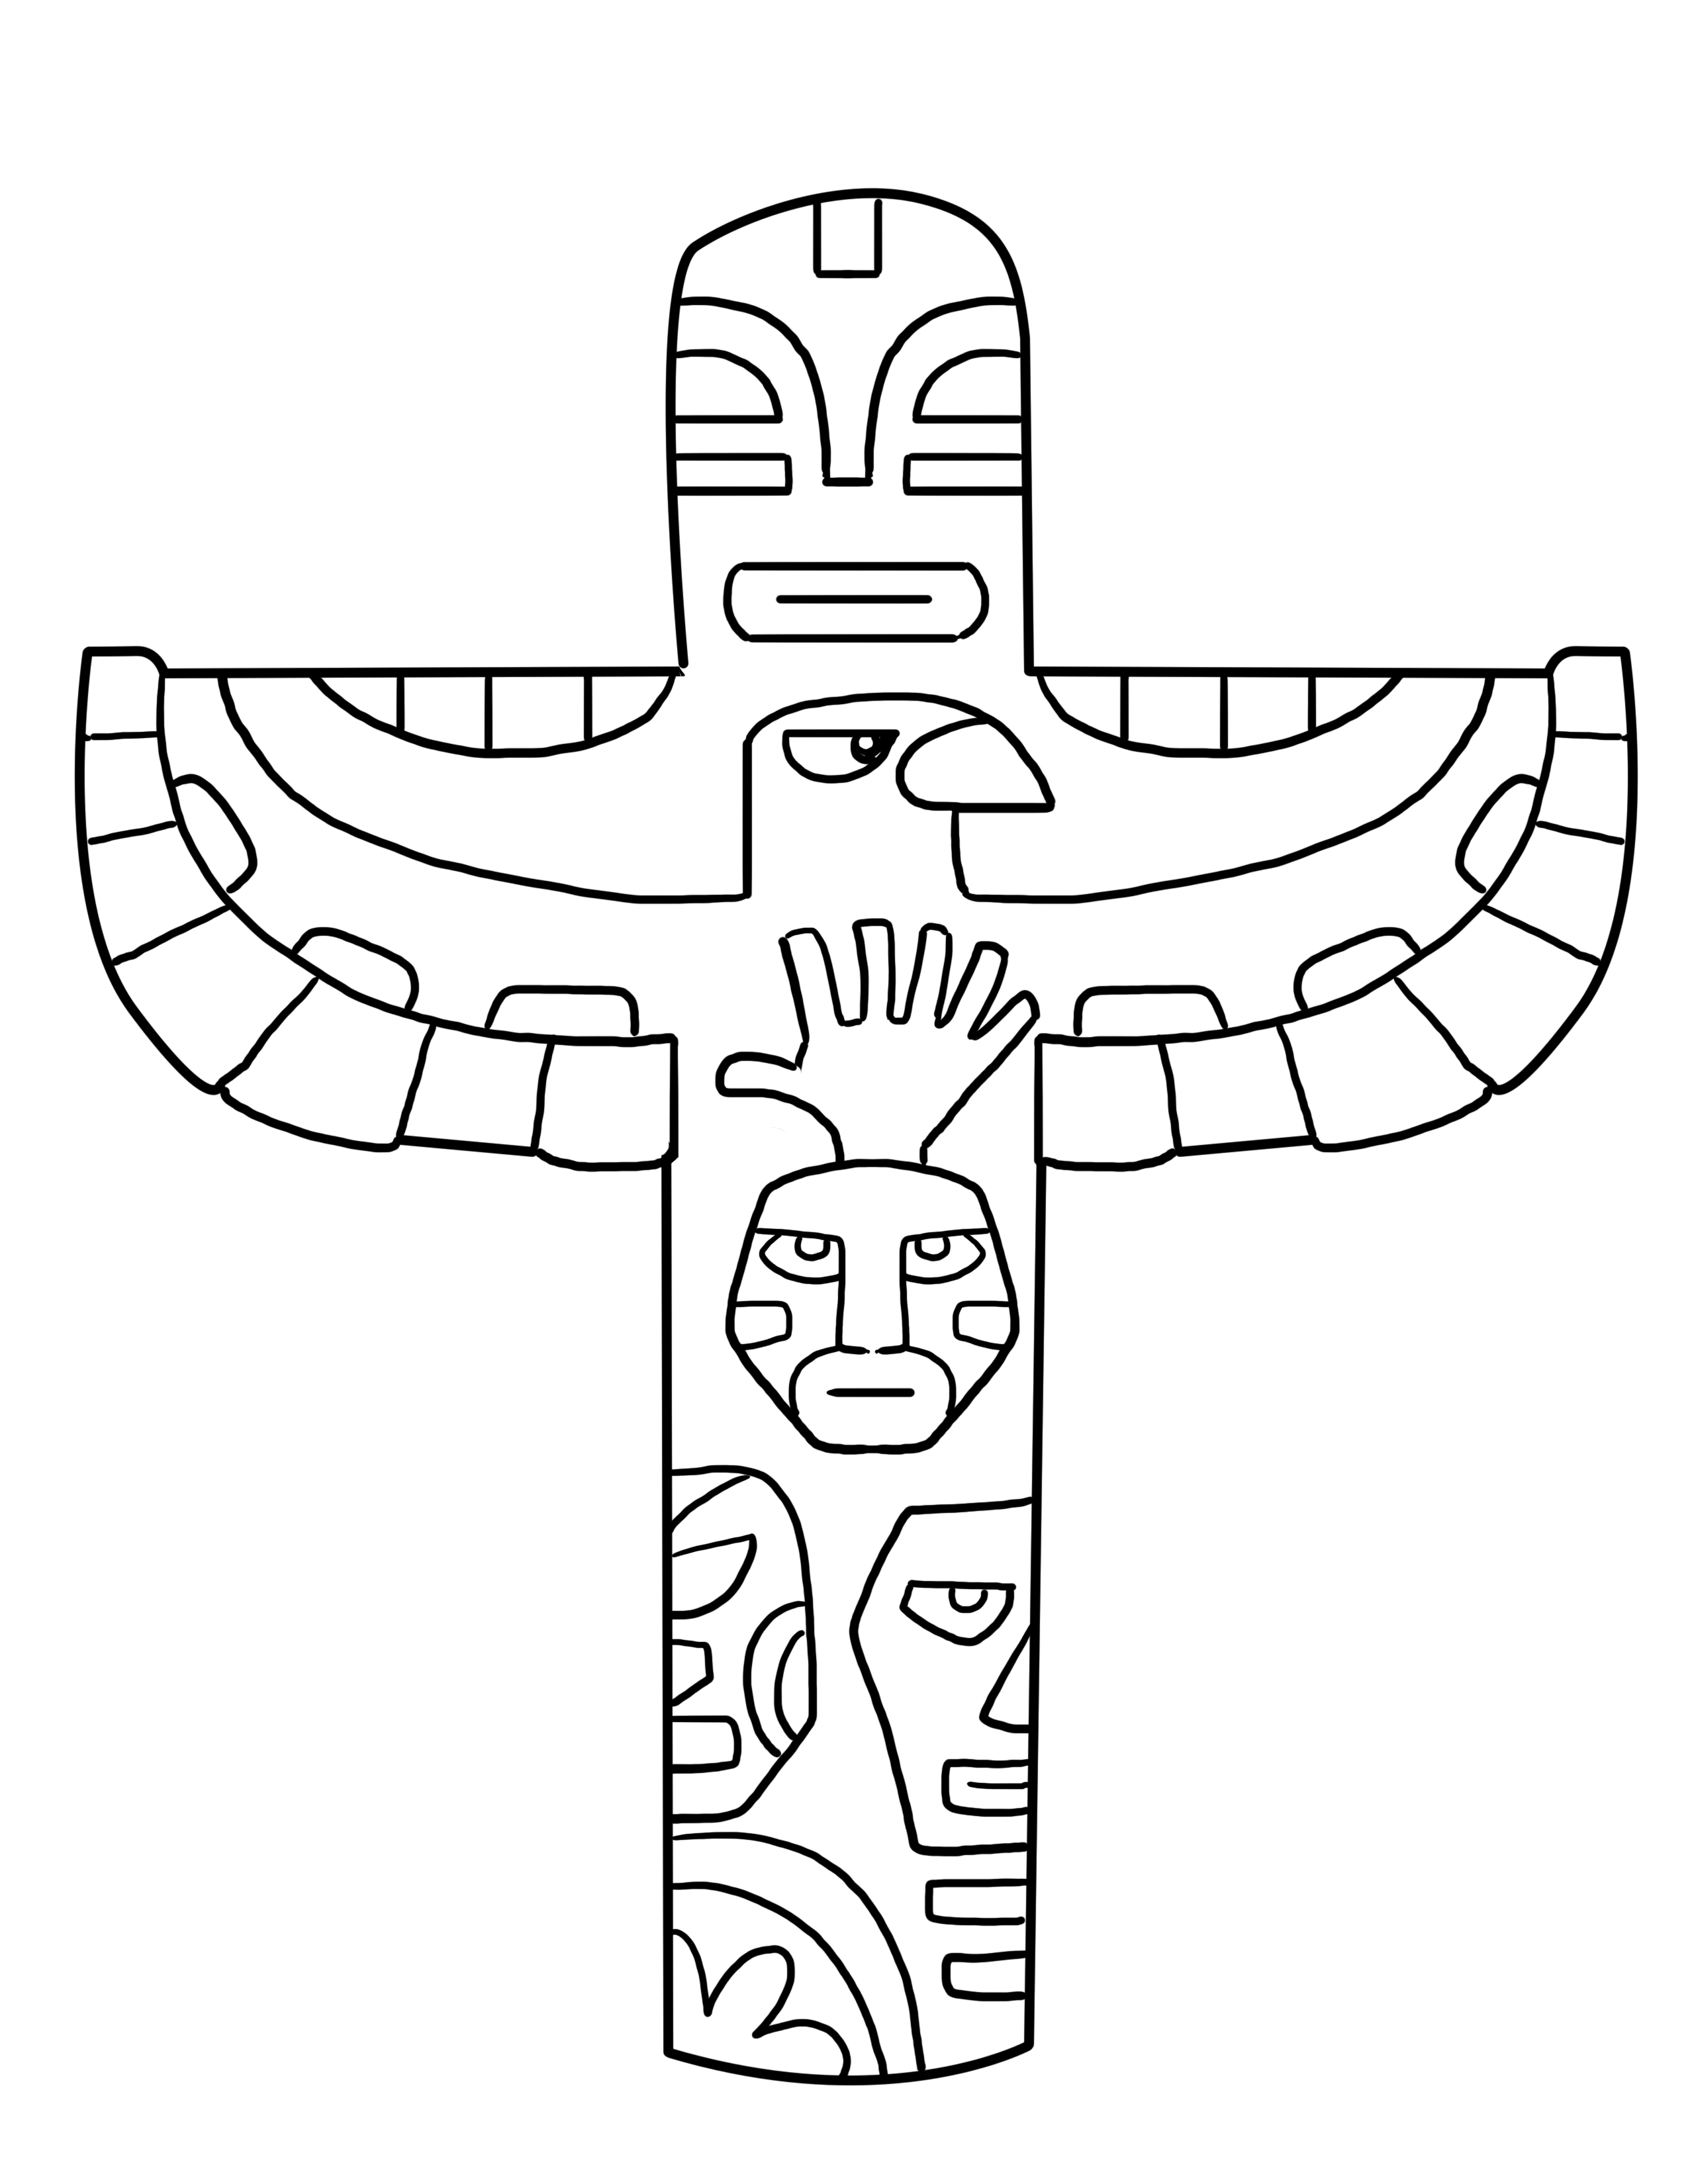 Simple Totem Pole Coloring Sheets Coloring Pages